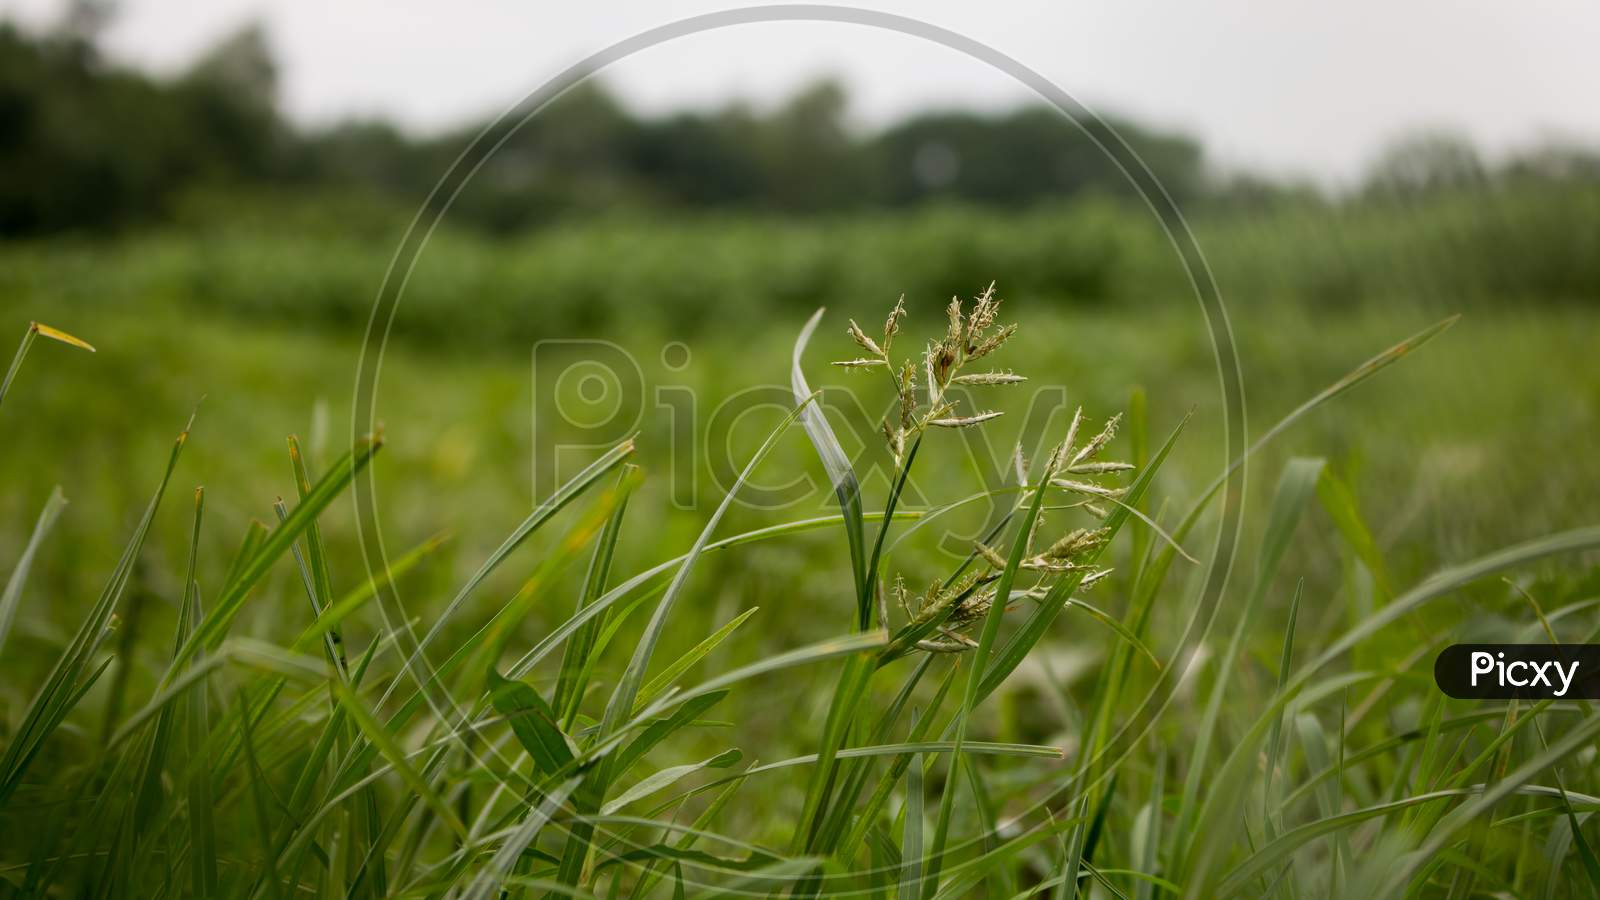 Natural Grass On The Agriculture Field.